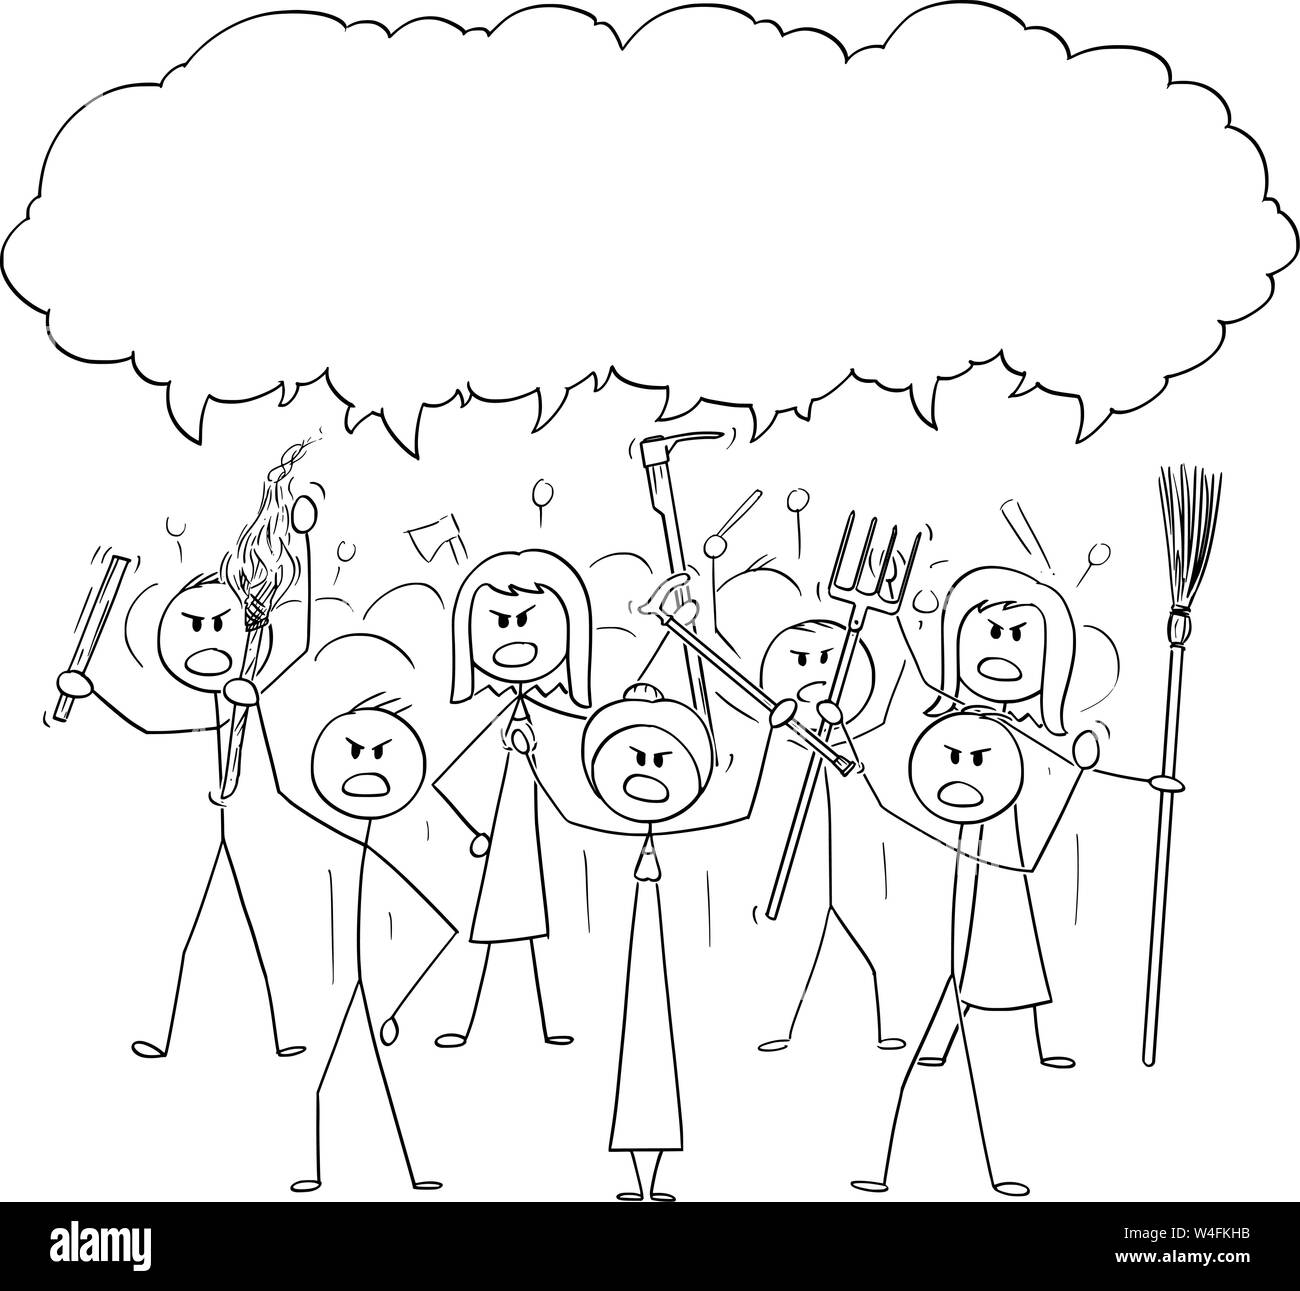 Vector cartoon stick figure drawing conceptual illustration of angry mob characters with torch and tools like pitchfork as weapons. Empty speech bubble ready for your text. Stock Vector